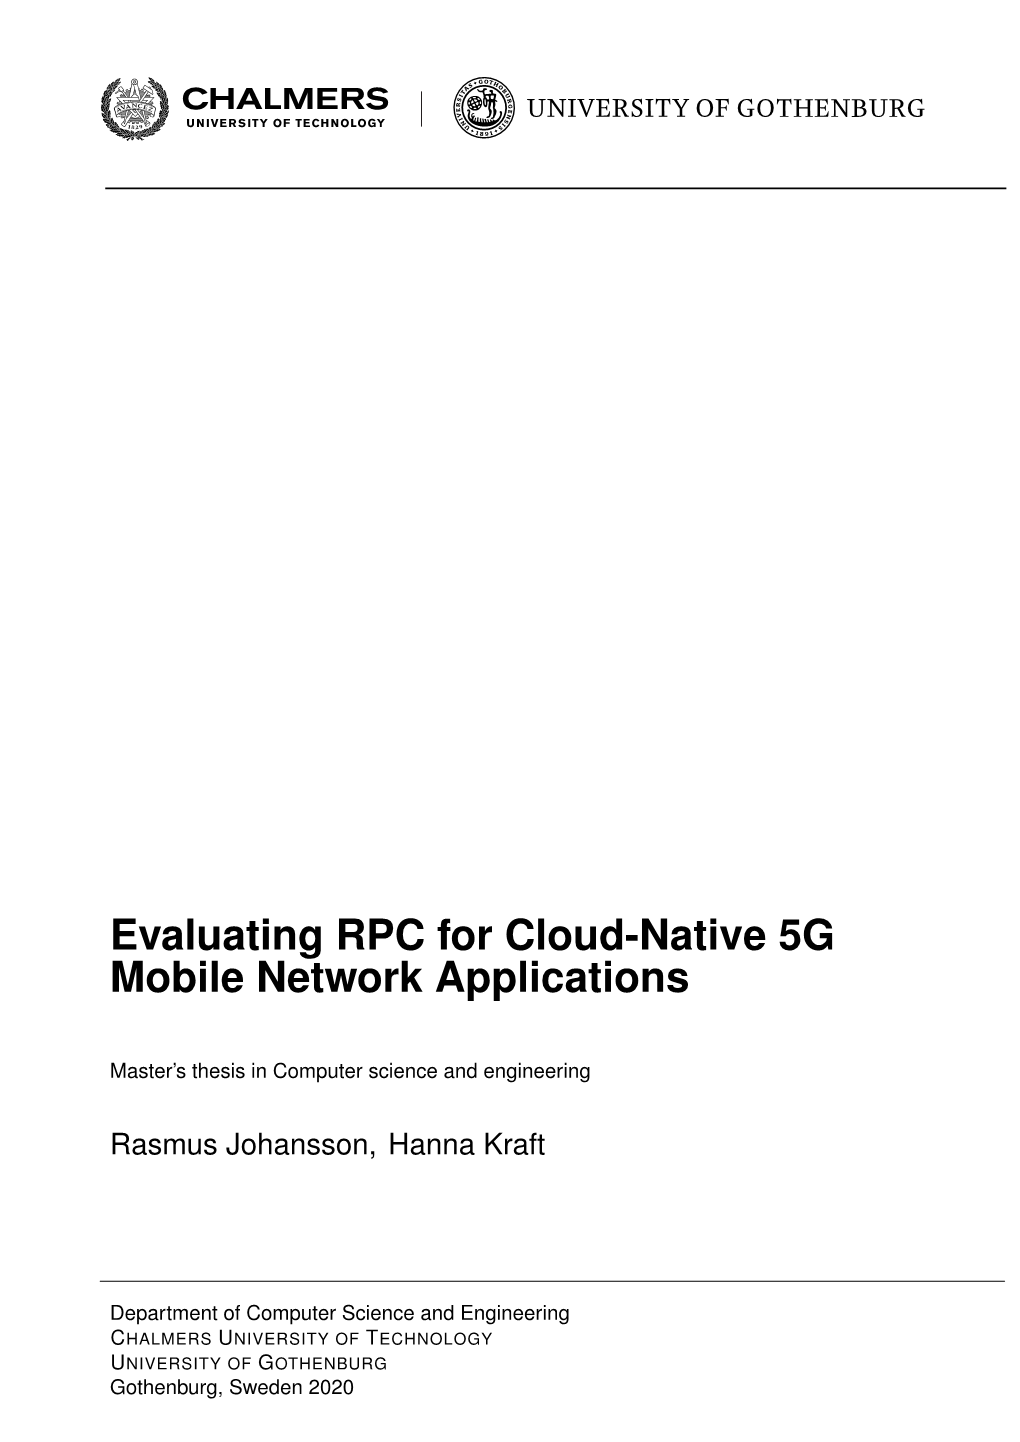 Evaluating RPC for Cloud-Native 5G Mobile Network Applications